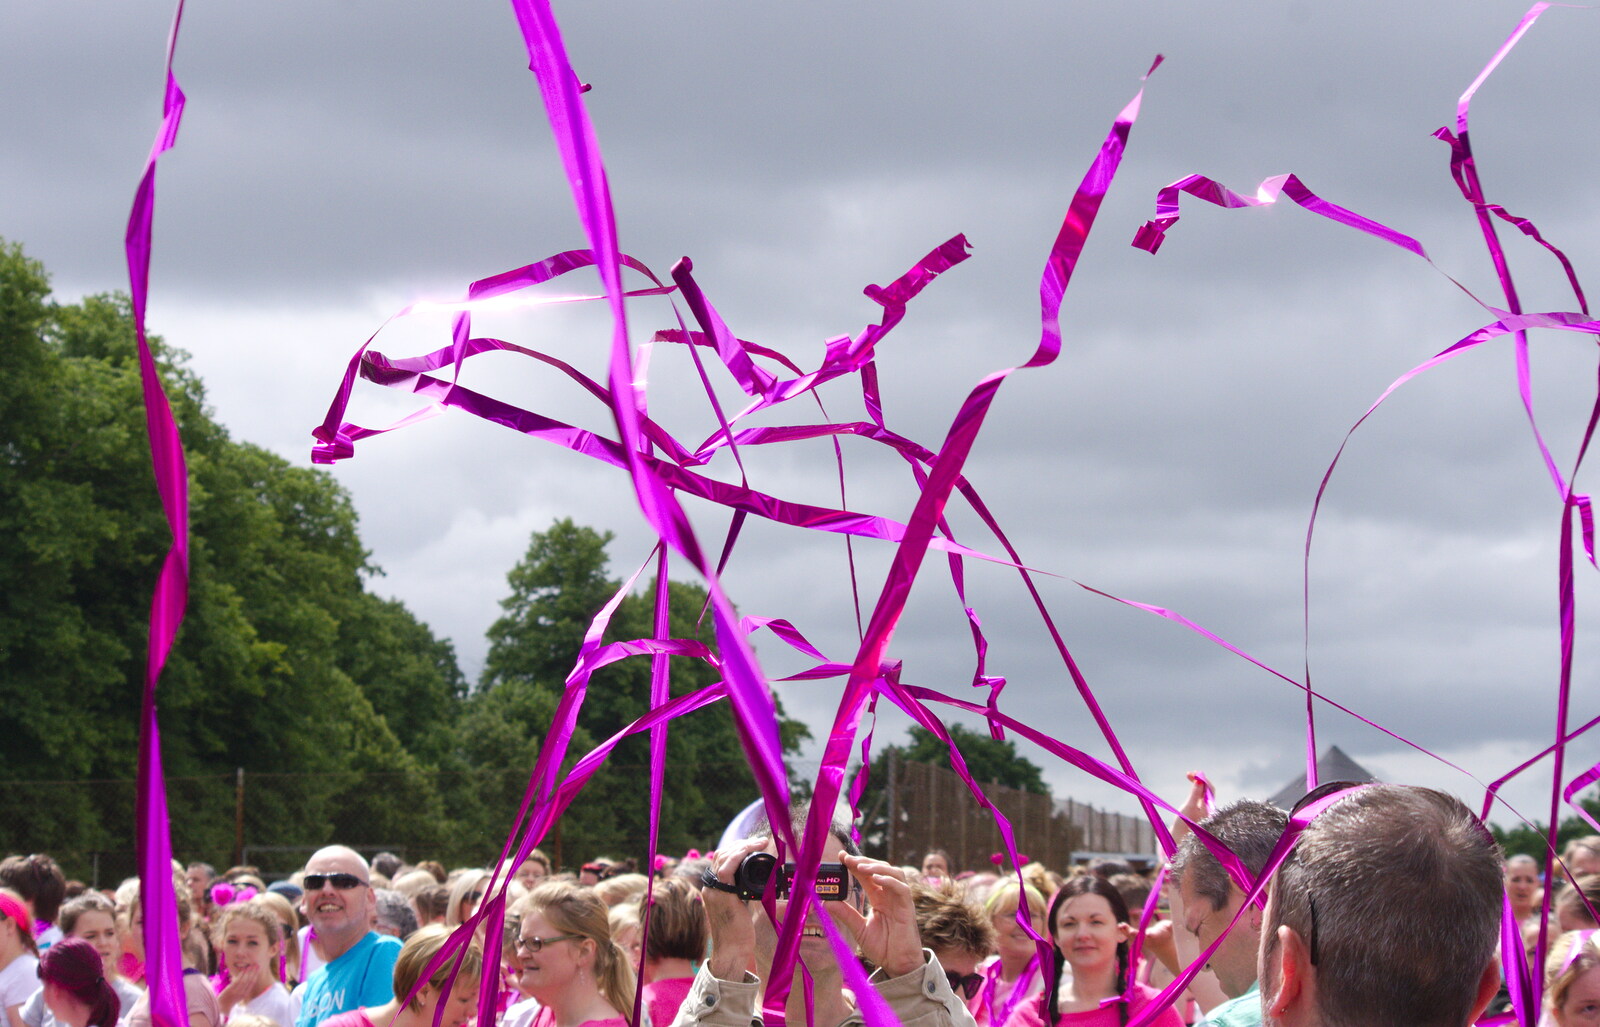 Streamers fly through the air from Isobel's Race For Life, Chantry Park, Ipswich - 11th June 2014